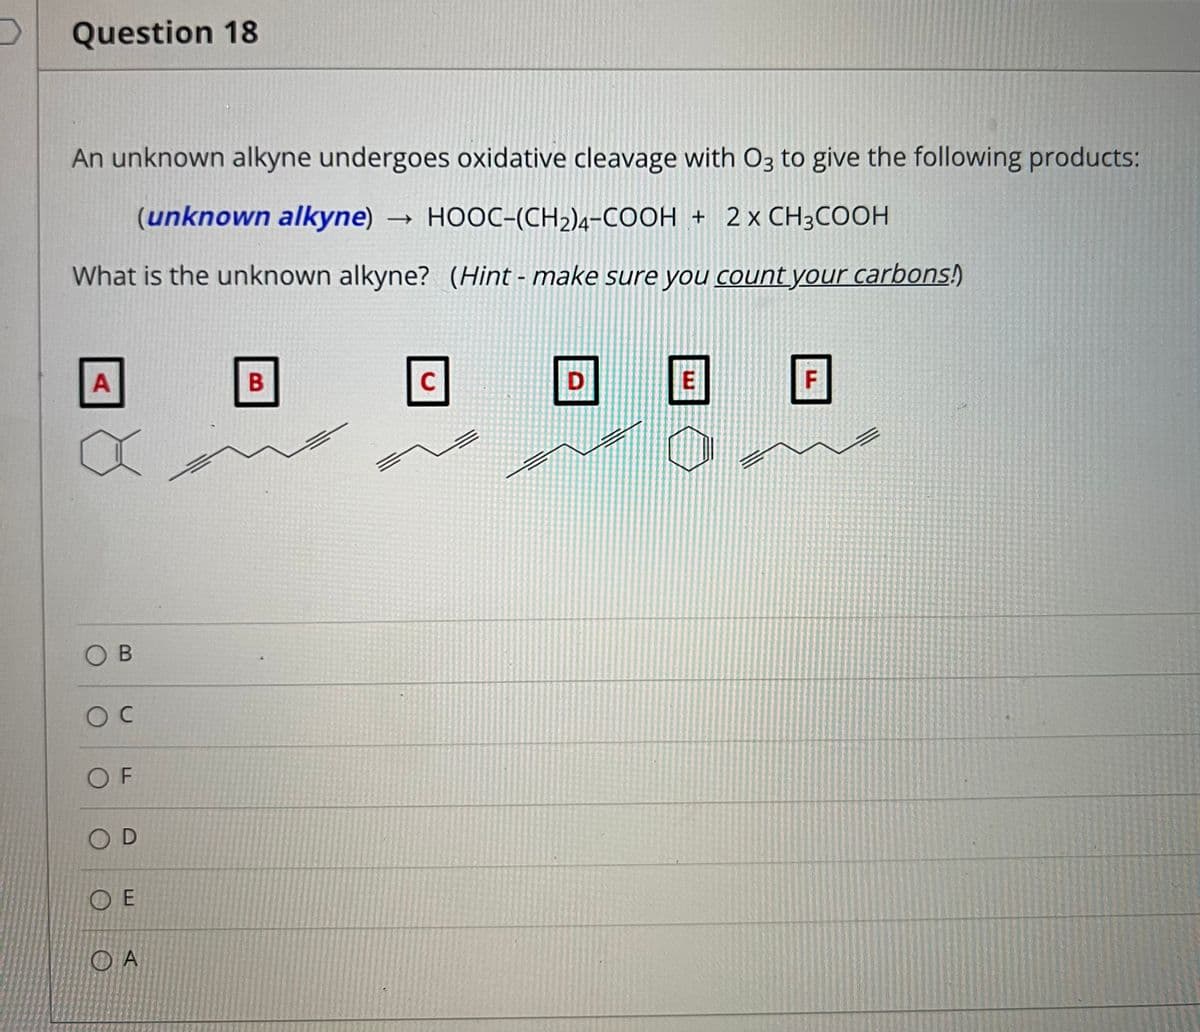 Question 18
An unknown alkyne undergoes oxidative cleavage with O3 to give the following products:
(unknown alkyne) → HOOC-(CH2)4-COOH + 2x CH3COOH
What is the unknown alkyne? (Hint - make sure you count your carbons!)
A
B
C
F
OB
O F
OD
O E
O A
